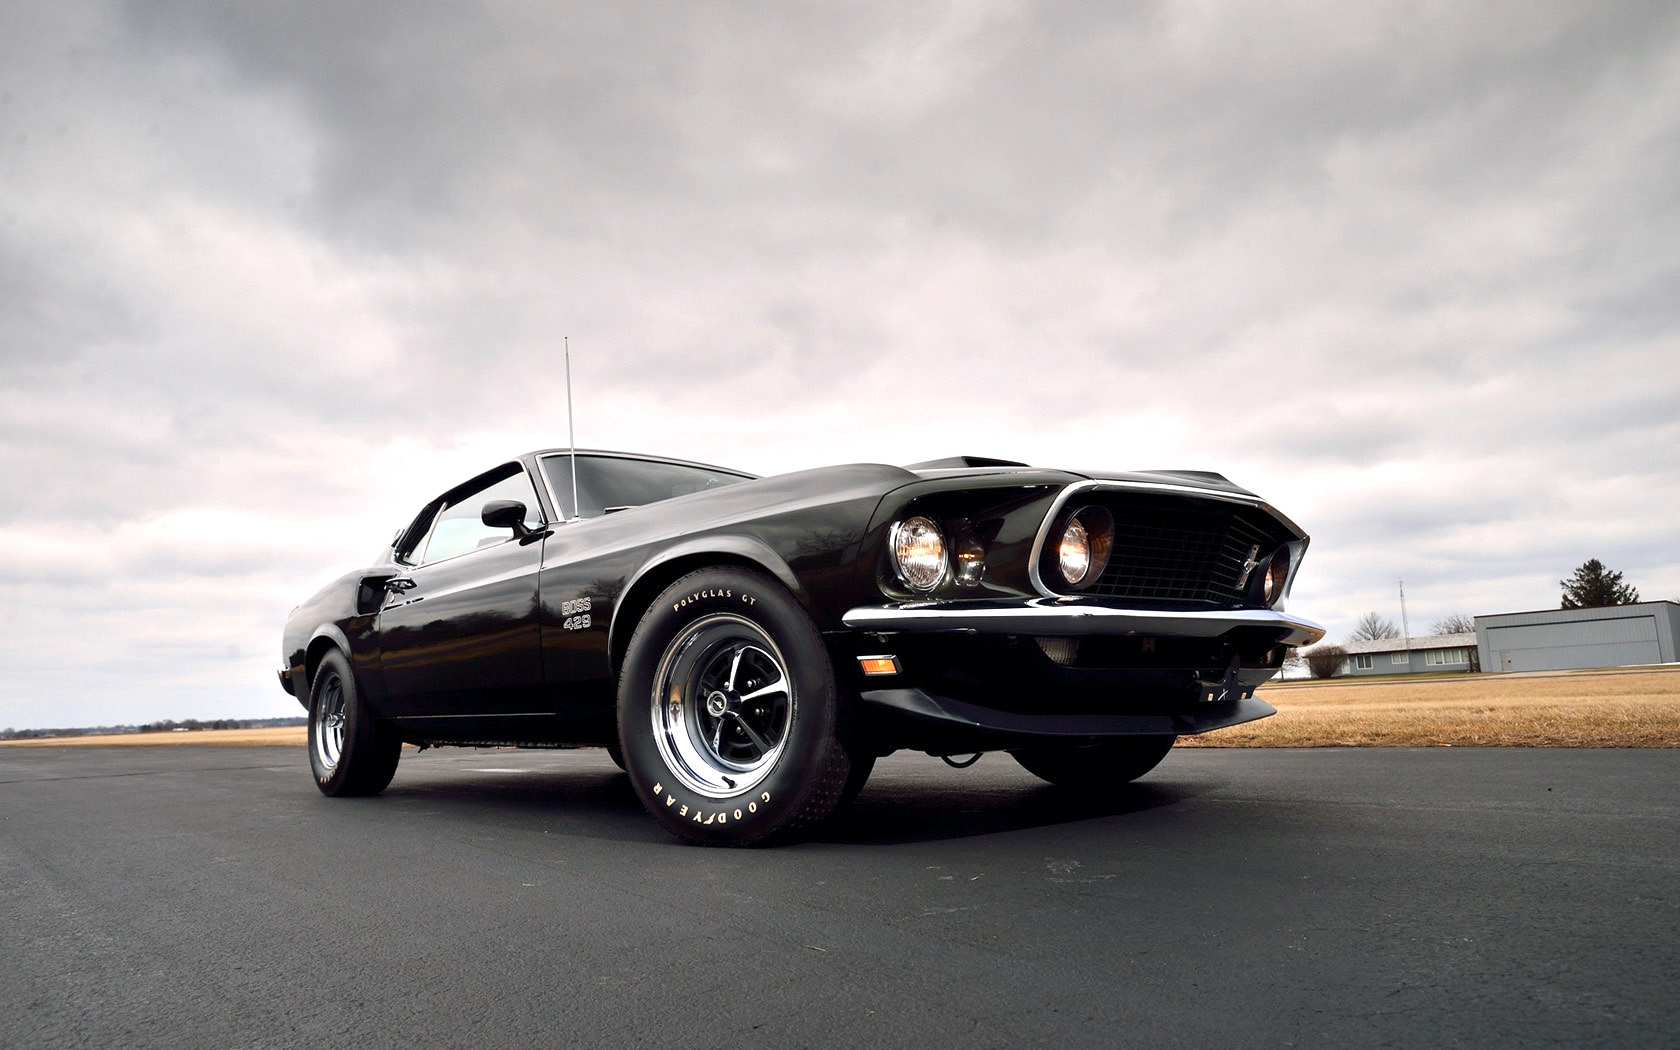 Ford Mustang Boss 429 1969